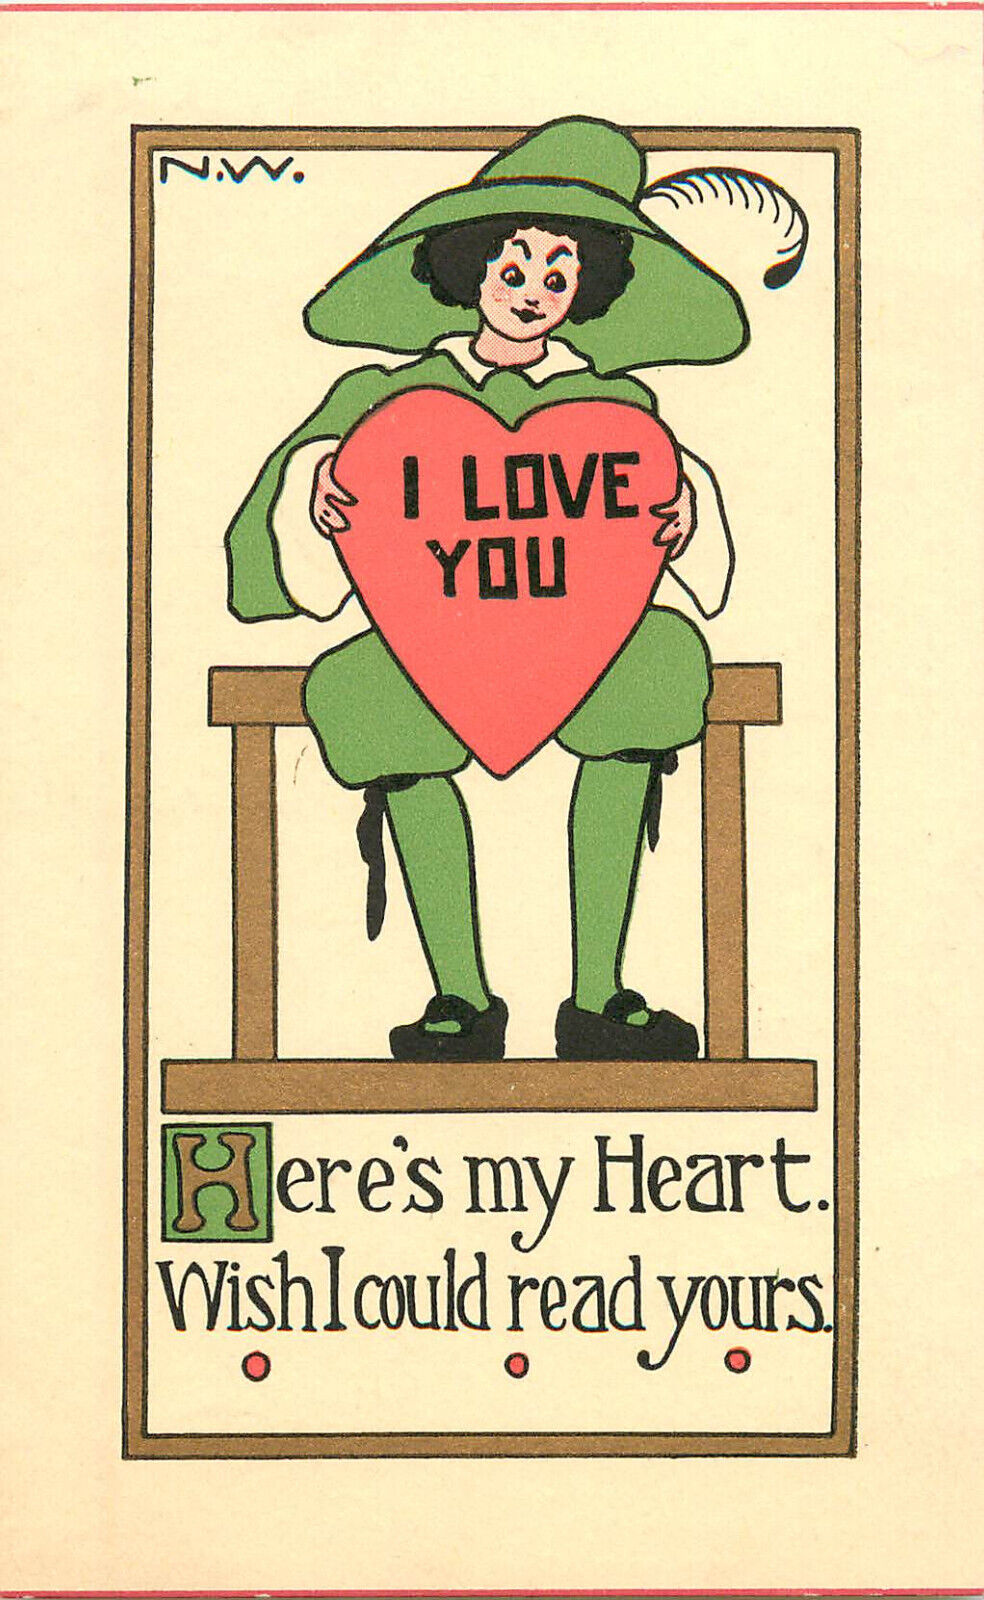 Rust Craft Postcard N.W. Romance I Love You Wish I Could Read Your Heart